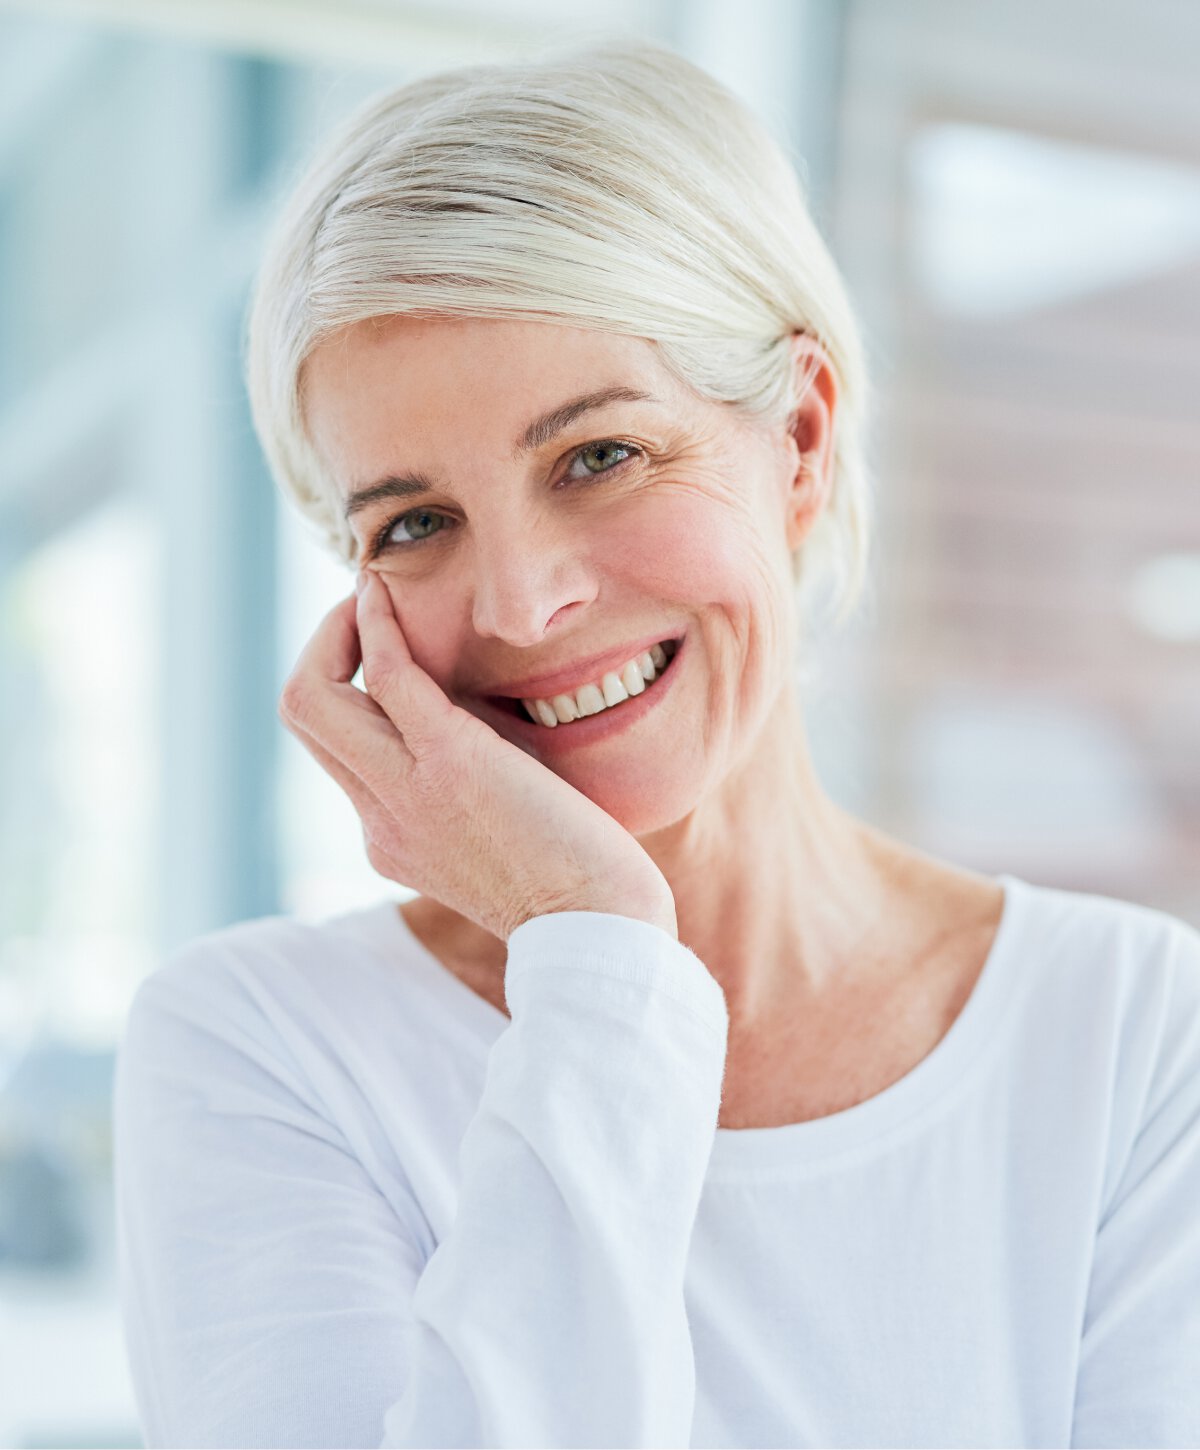 Los Angeles neck lift model smiling and holding her face